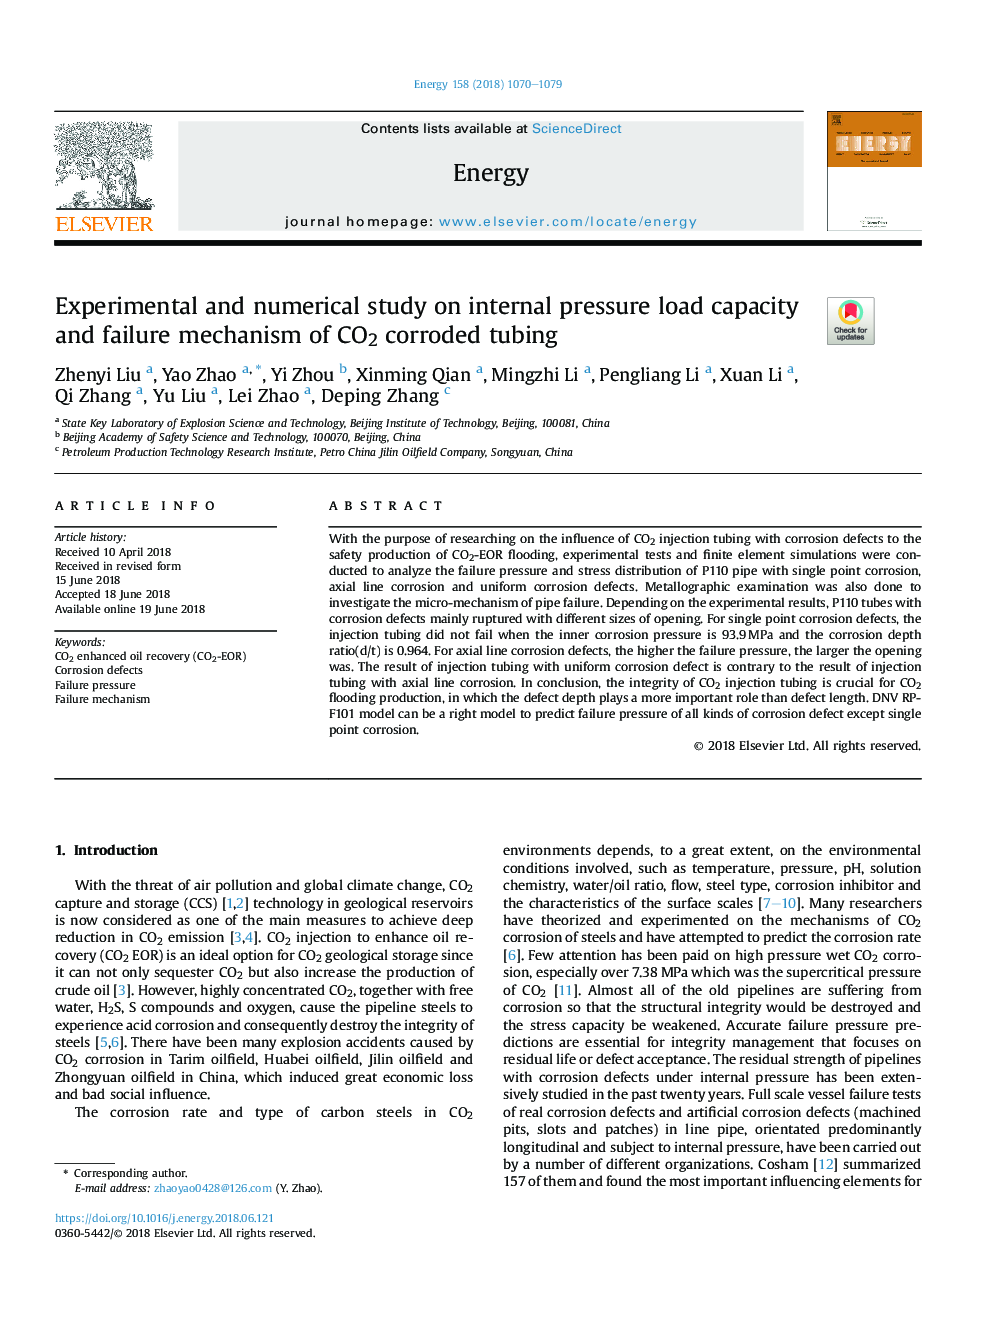 Experimental and numerical study on internal pressure load capacity and failure mechanism of CO2 corroded tubing